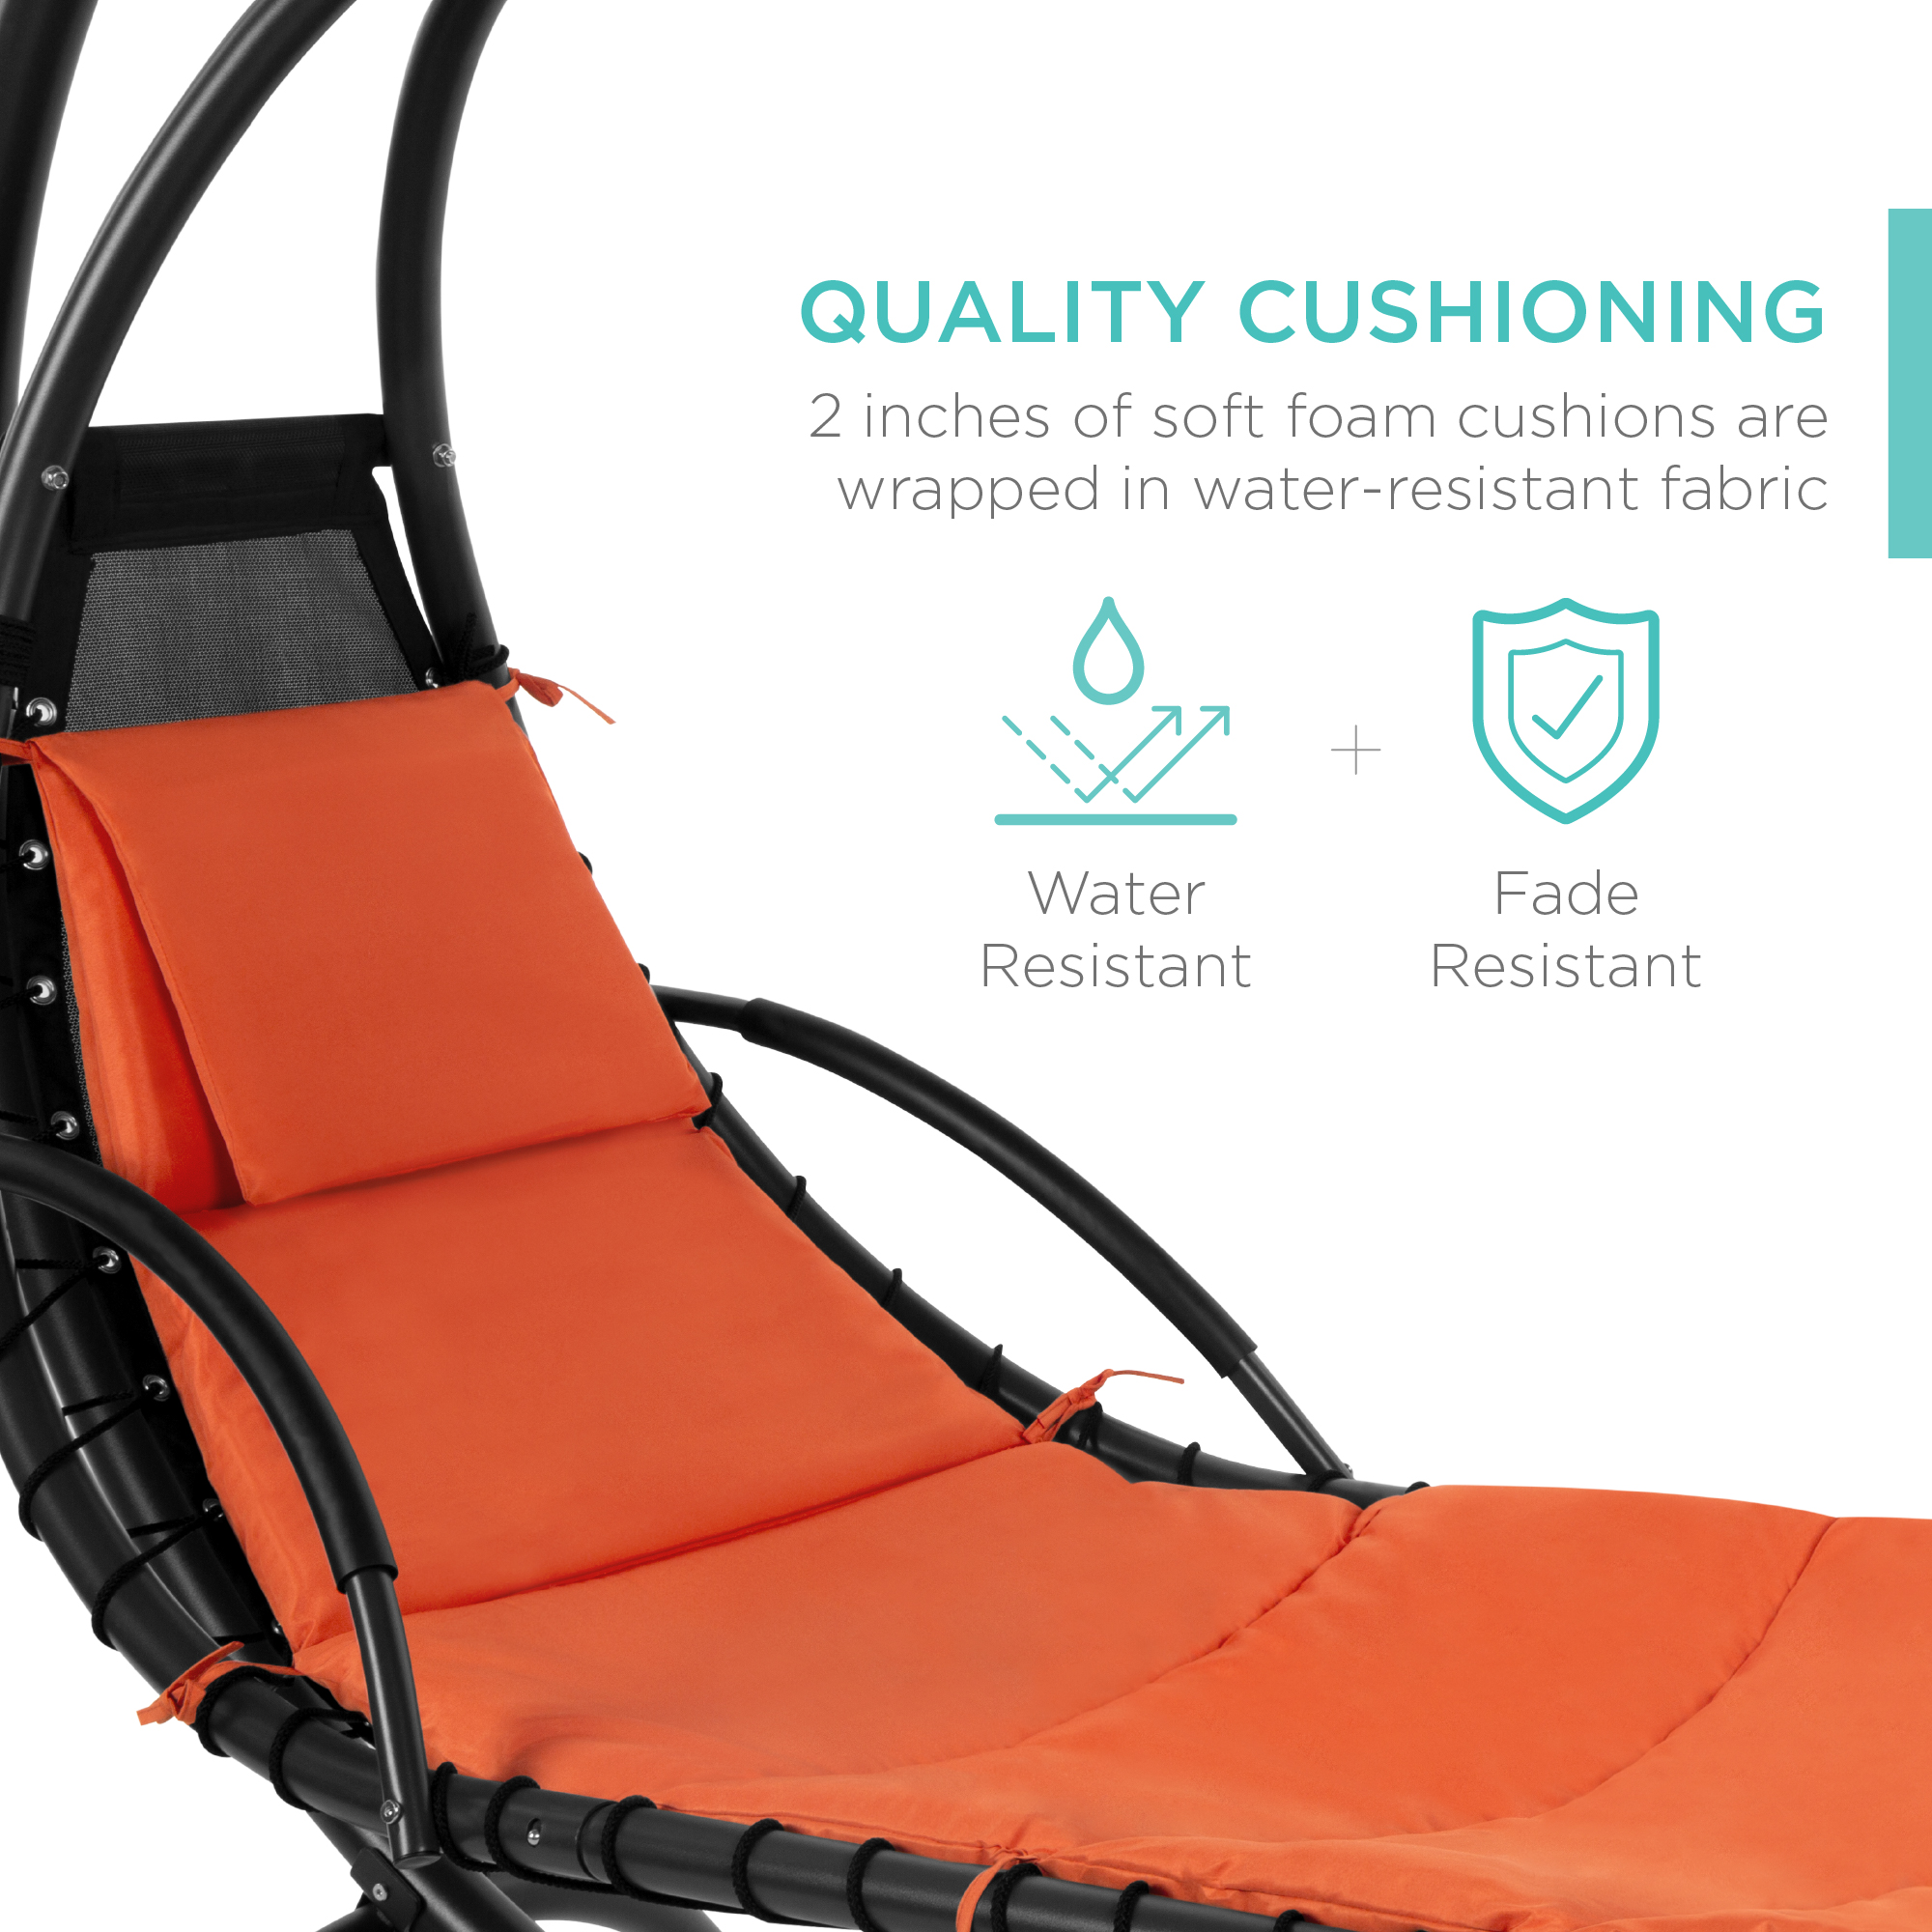 Best Choice Products Hanging Curved Chaise Lounge Chair Swing for Backyard, Patio w/ Pillow, Shade, Stand - Orange - image 5 of 8